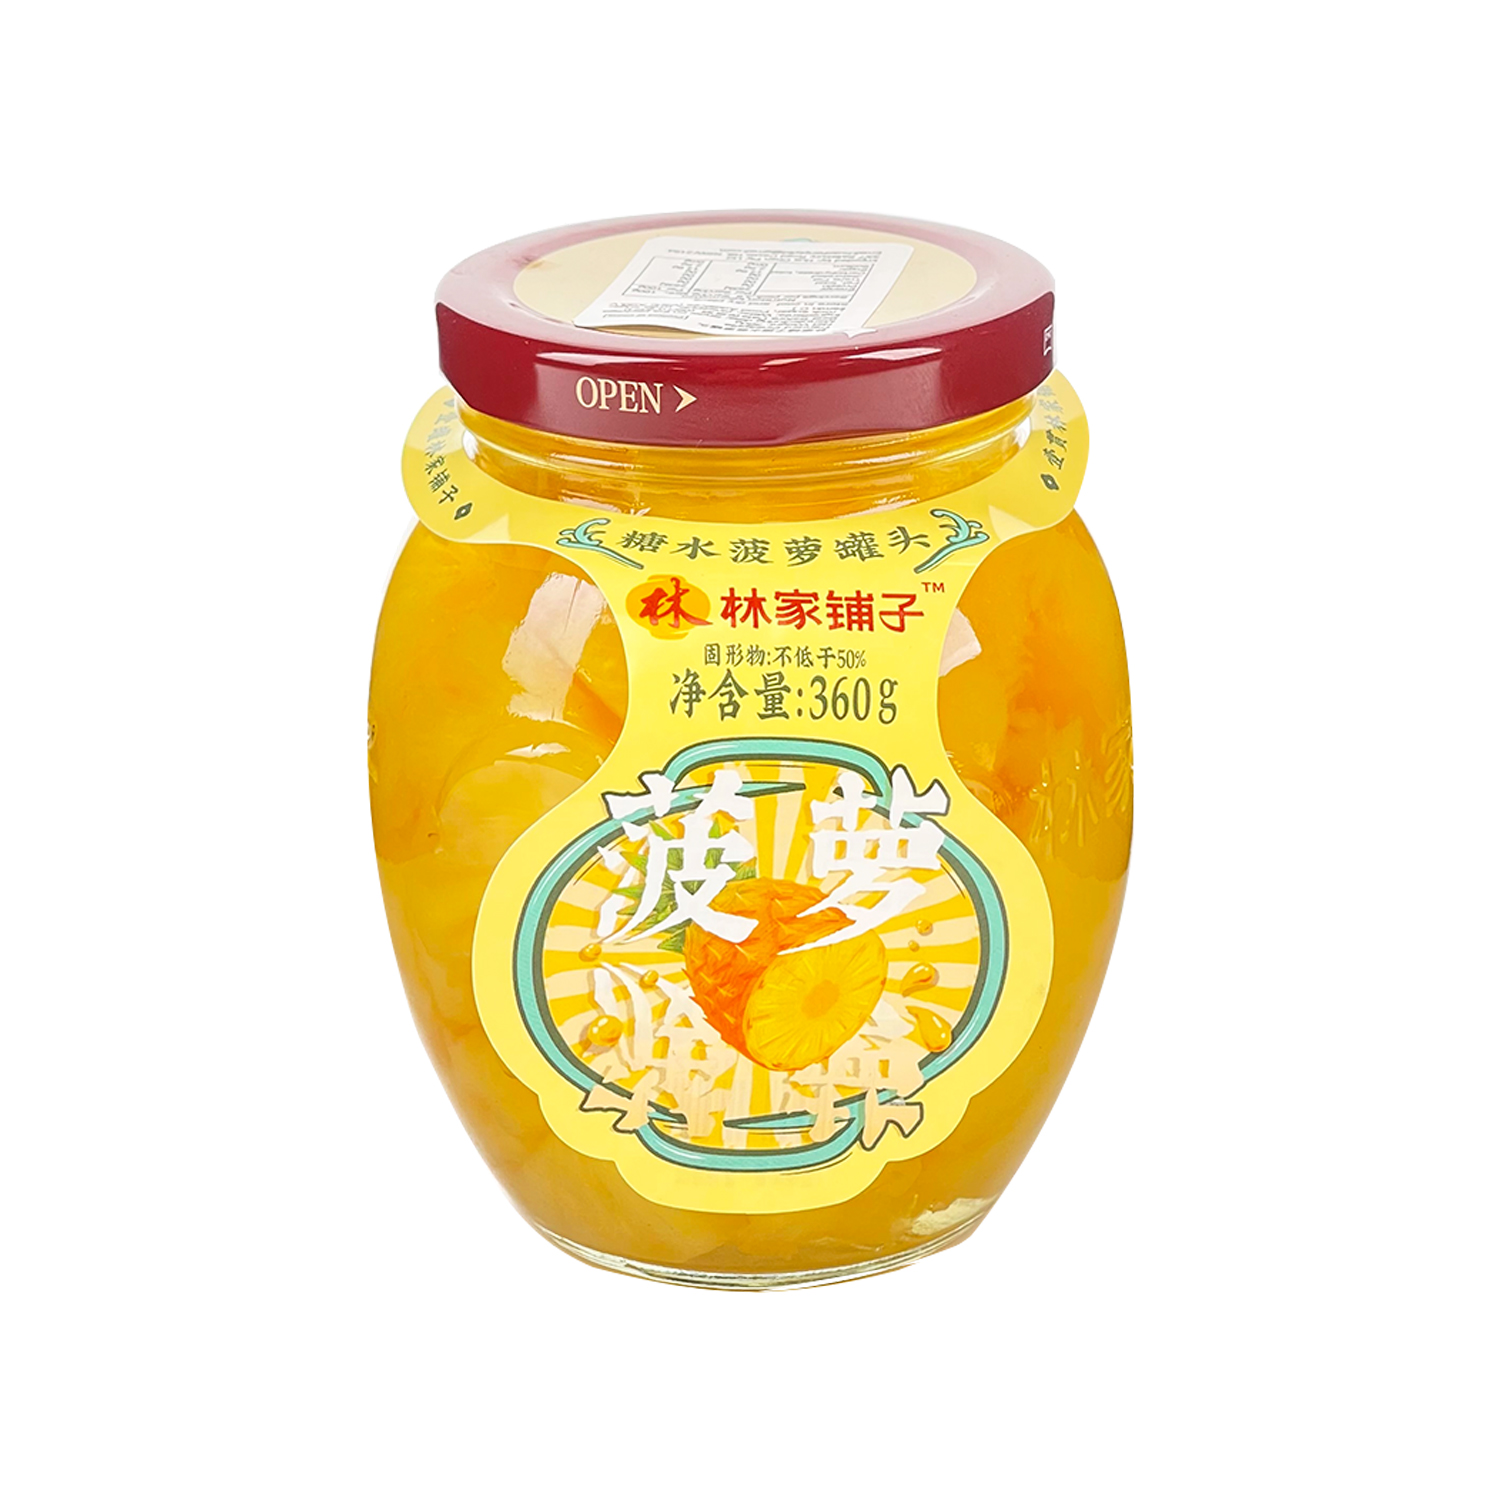 Leasun Food Canned Pineapple in Syrup 360g-eBest-Nuts & Dried Fruit,Snacks & Confectionery